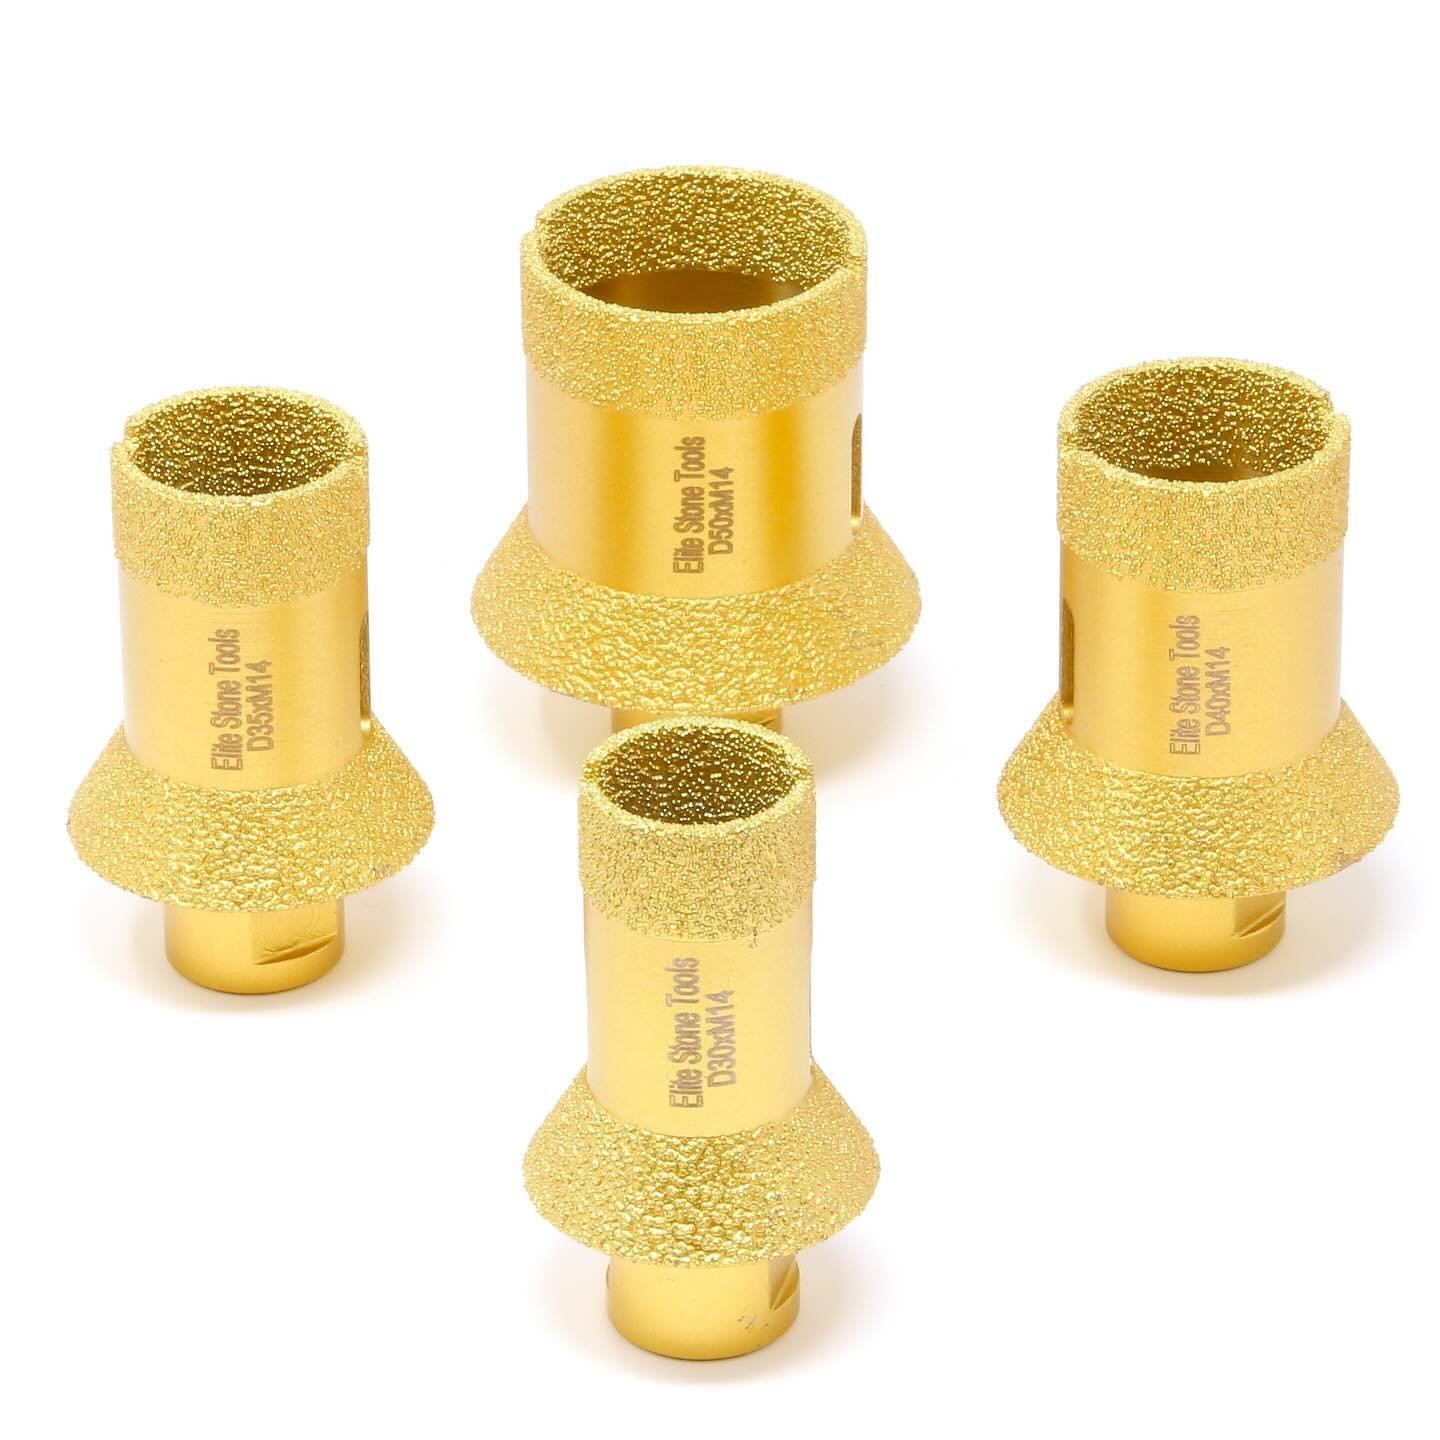 We are now stocking vacuum brazed core bits with m14 fittings with either a 60 degree chamfer or an extra 20mm diameter ring. These are available in 20mm - 50mm in 5mm increments. 

#newpatio #masonary #indiansandstone #gardenservices #hardlandscapin